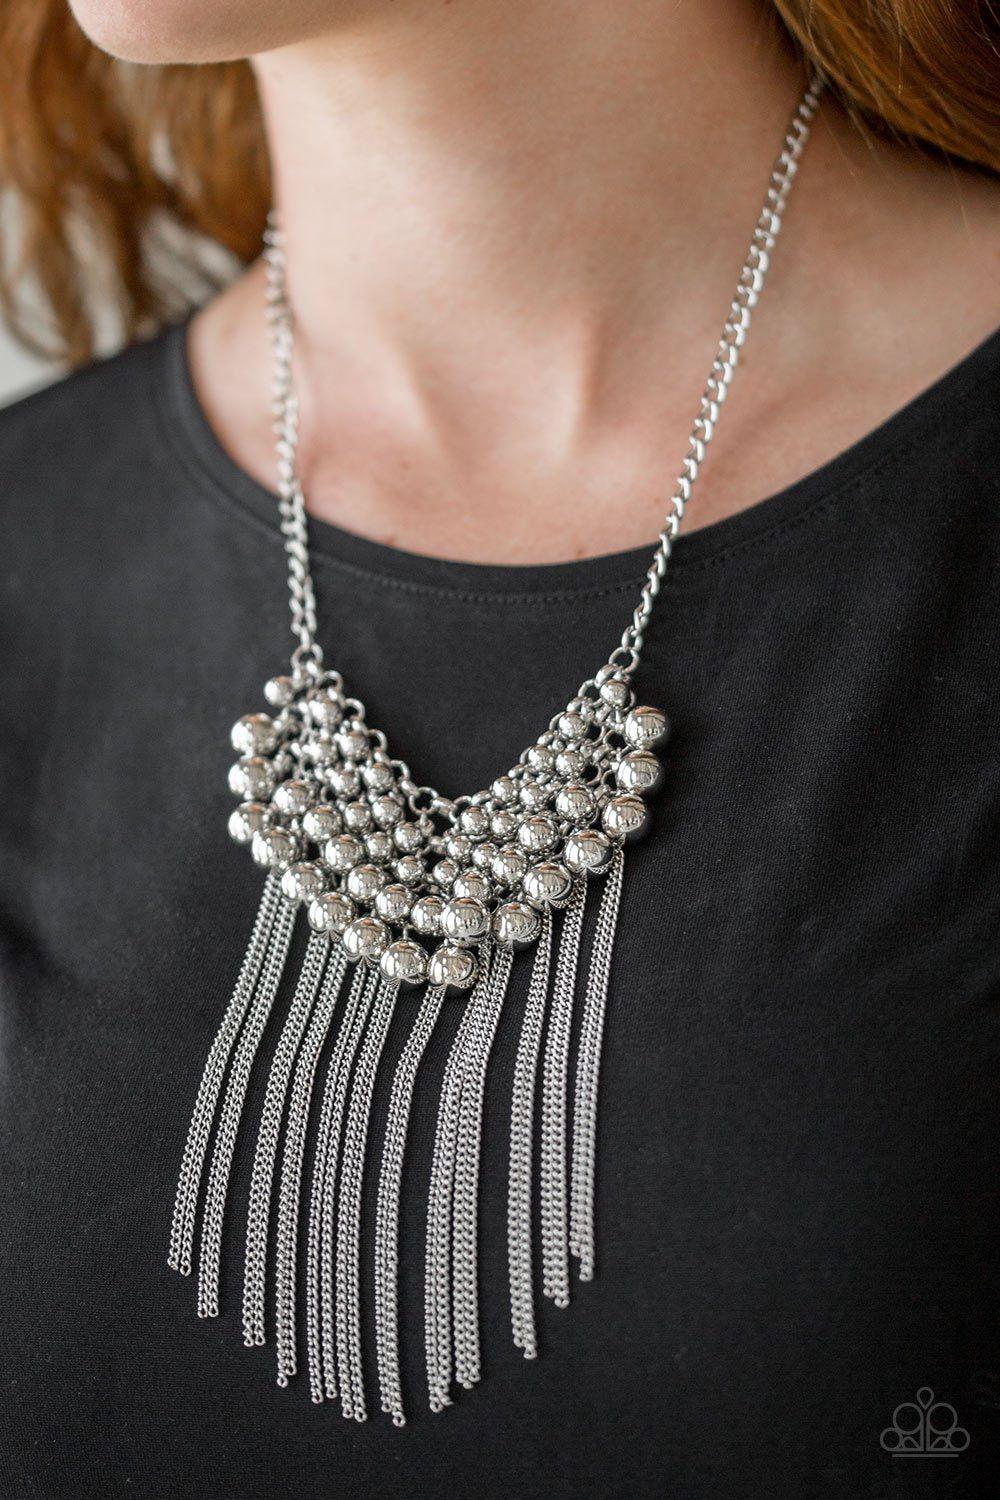 DIVA-de and Rule Silver Necklace - Paparazzi Accessories - lightbox -CarasShop.com - $5 Jewelry by Cara Jewels